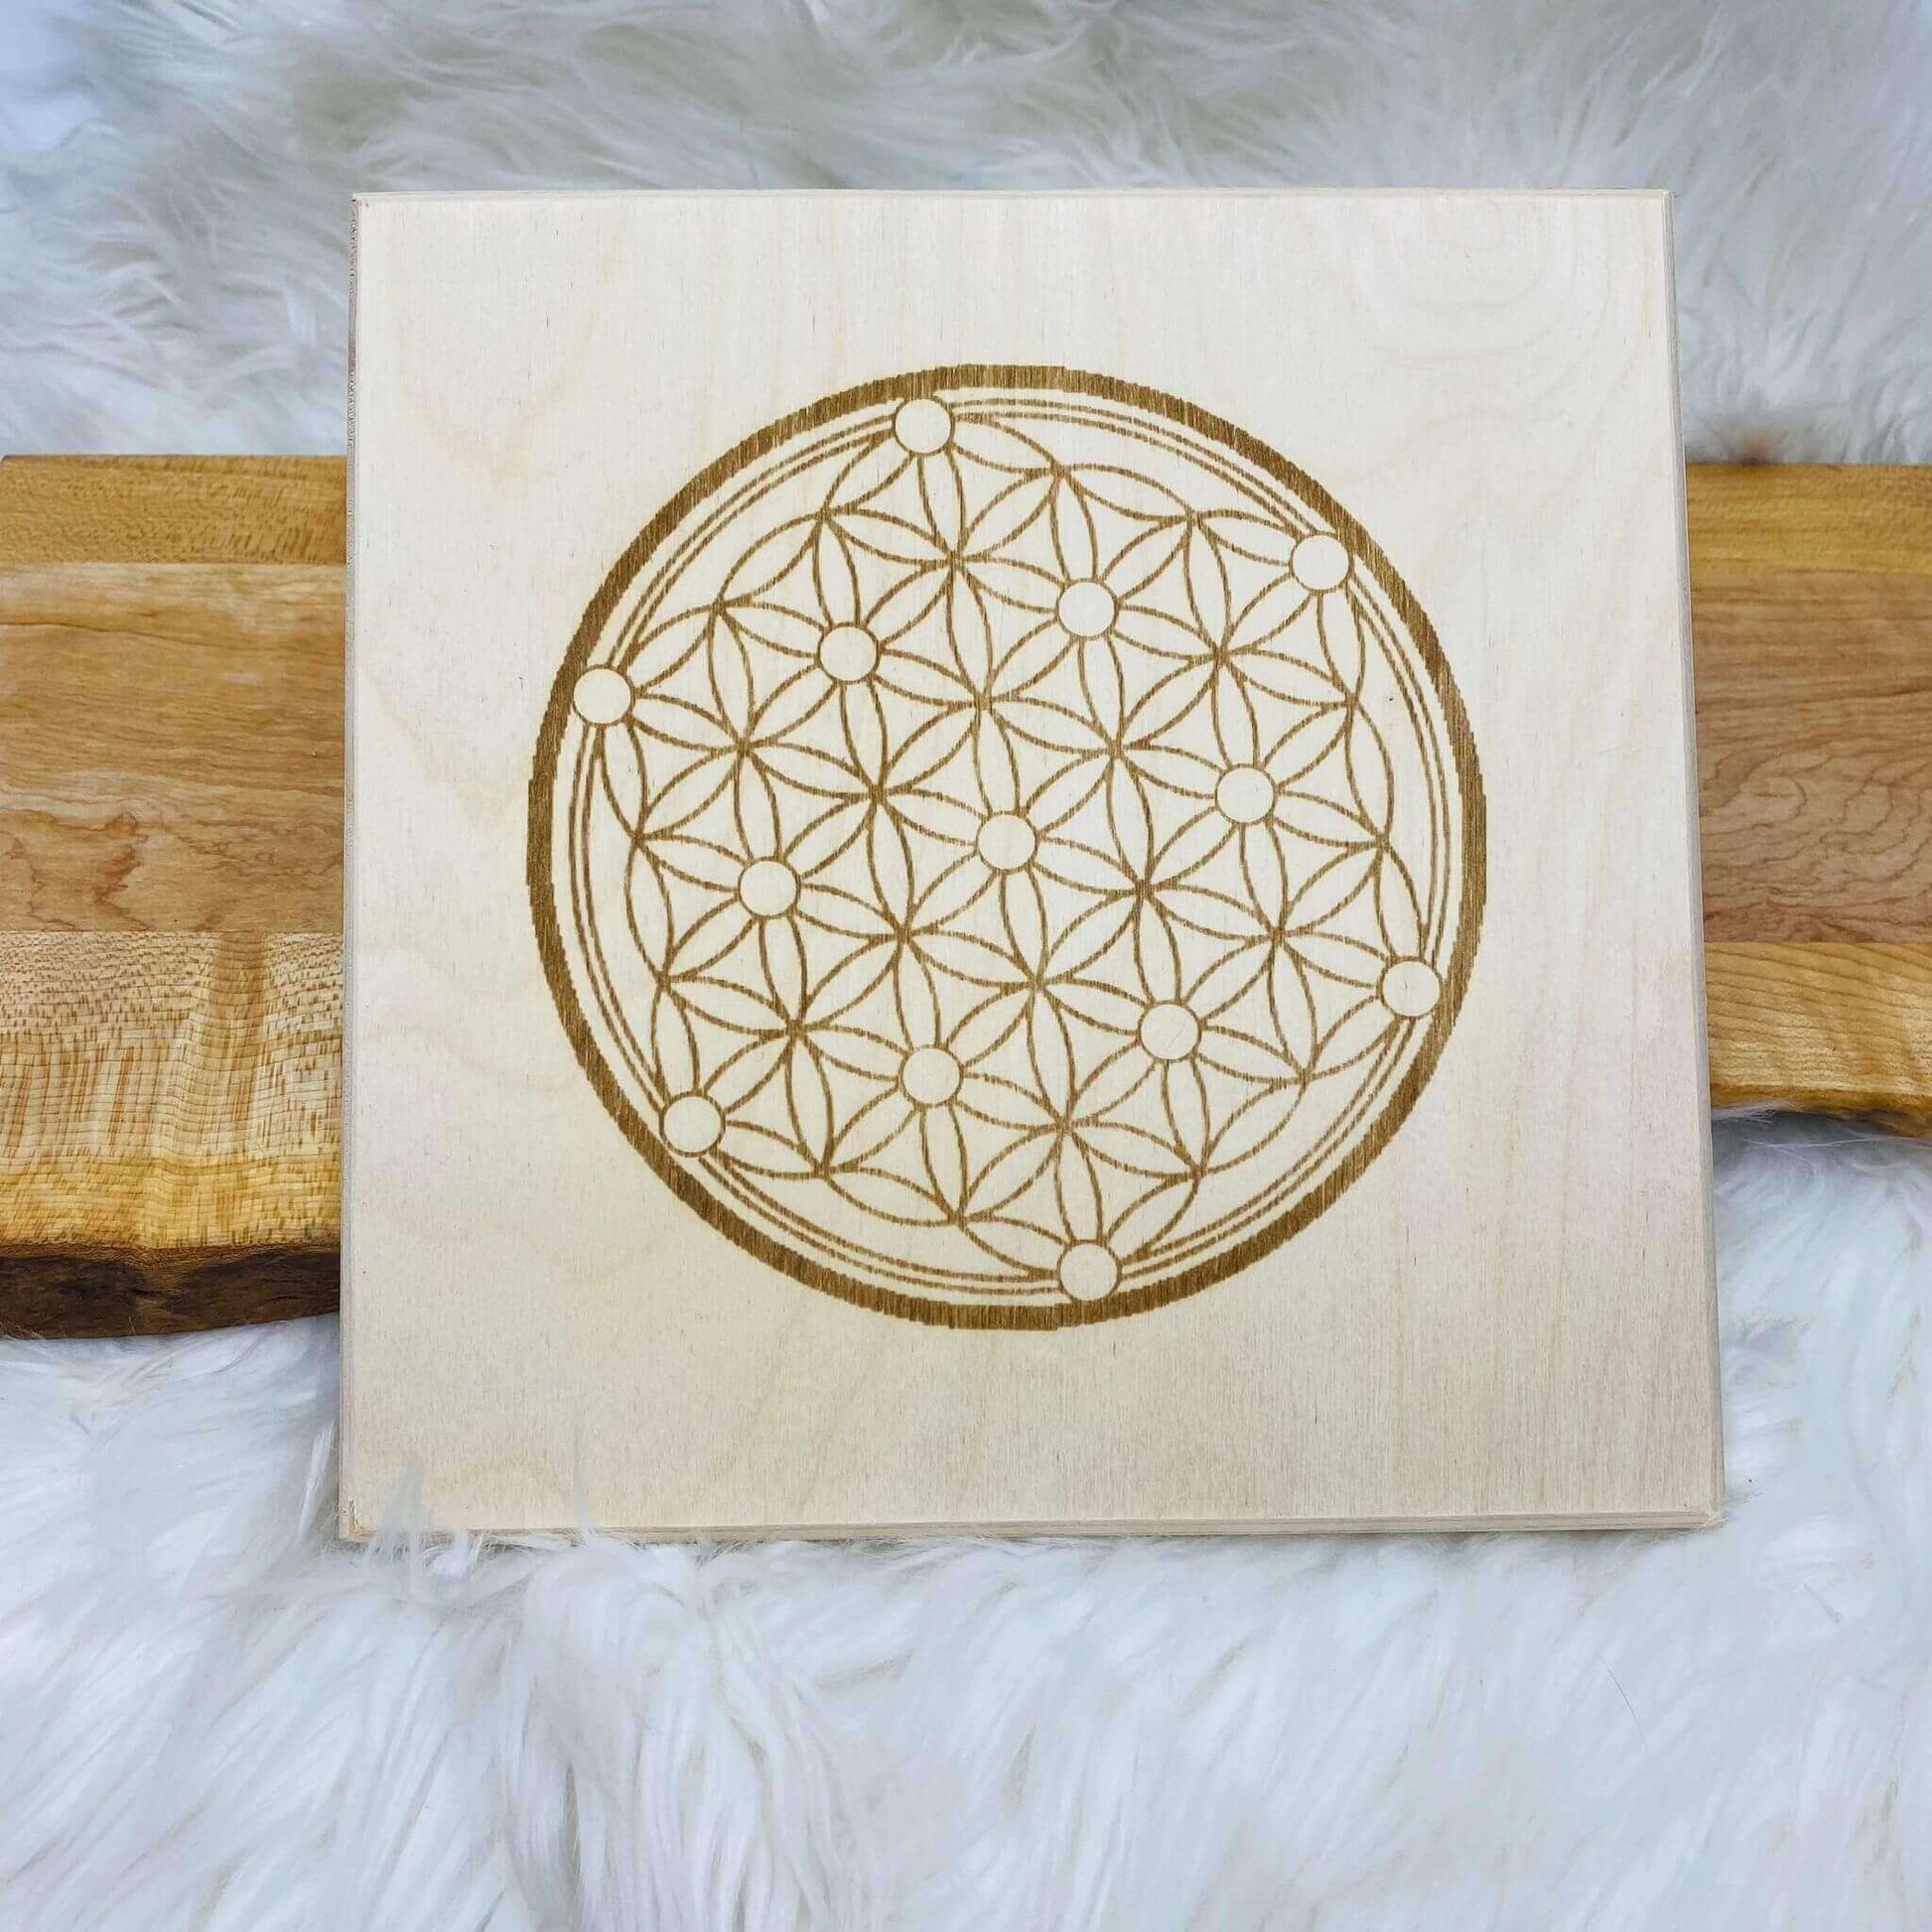 Flower of life wood plaque at $25 only from Spiral Rain